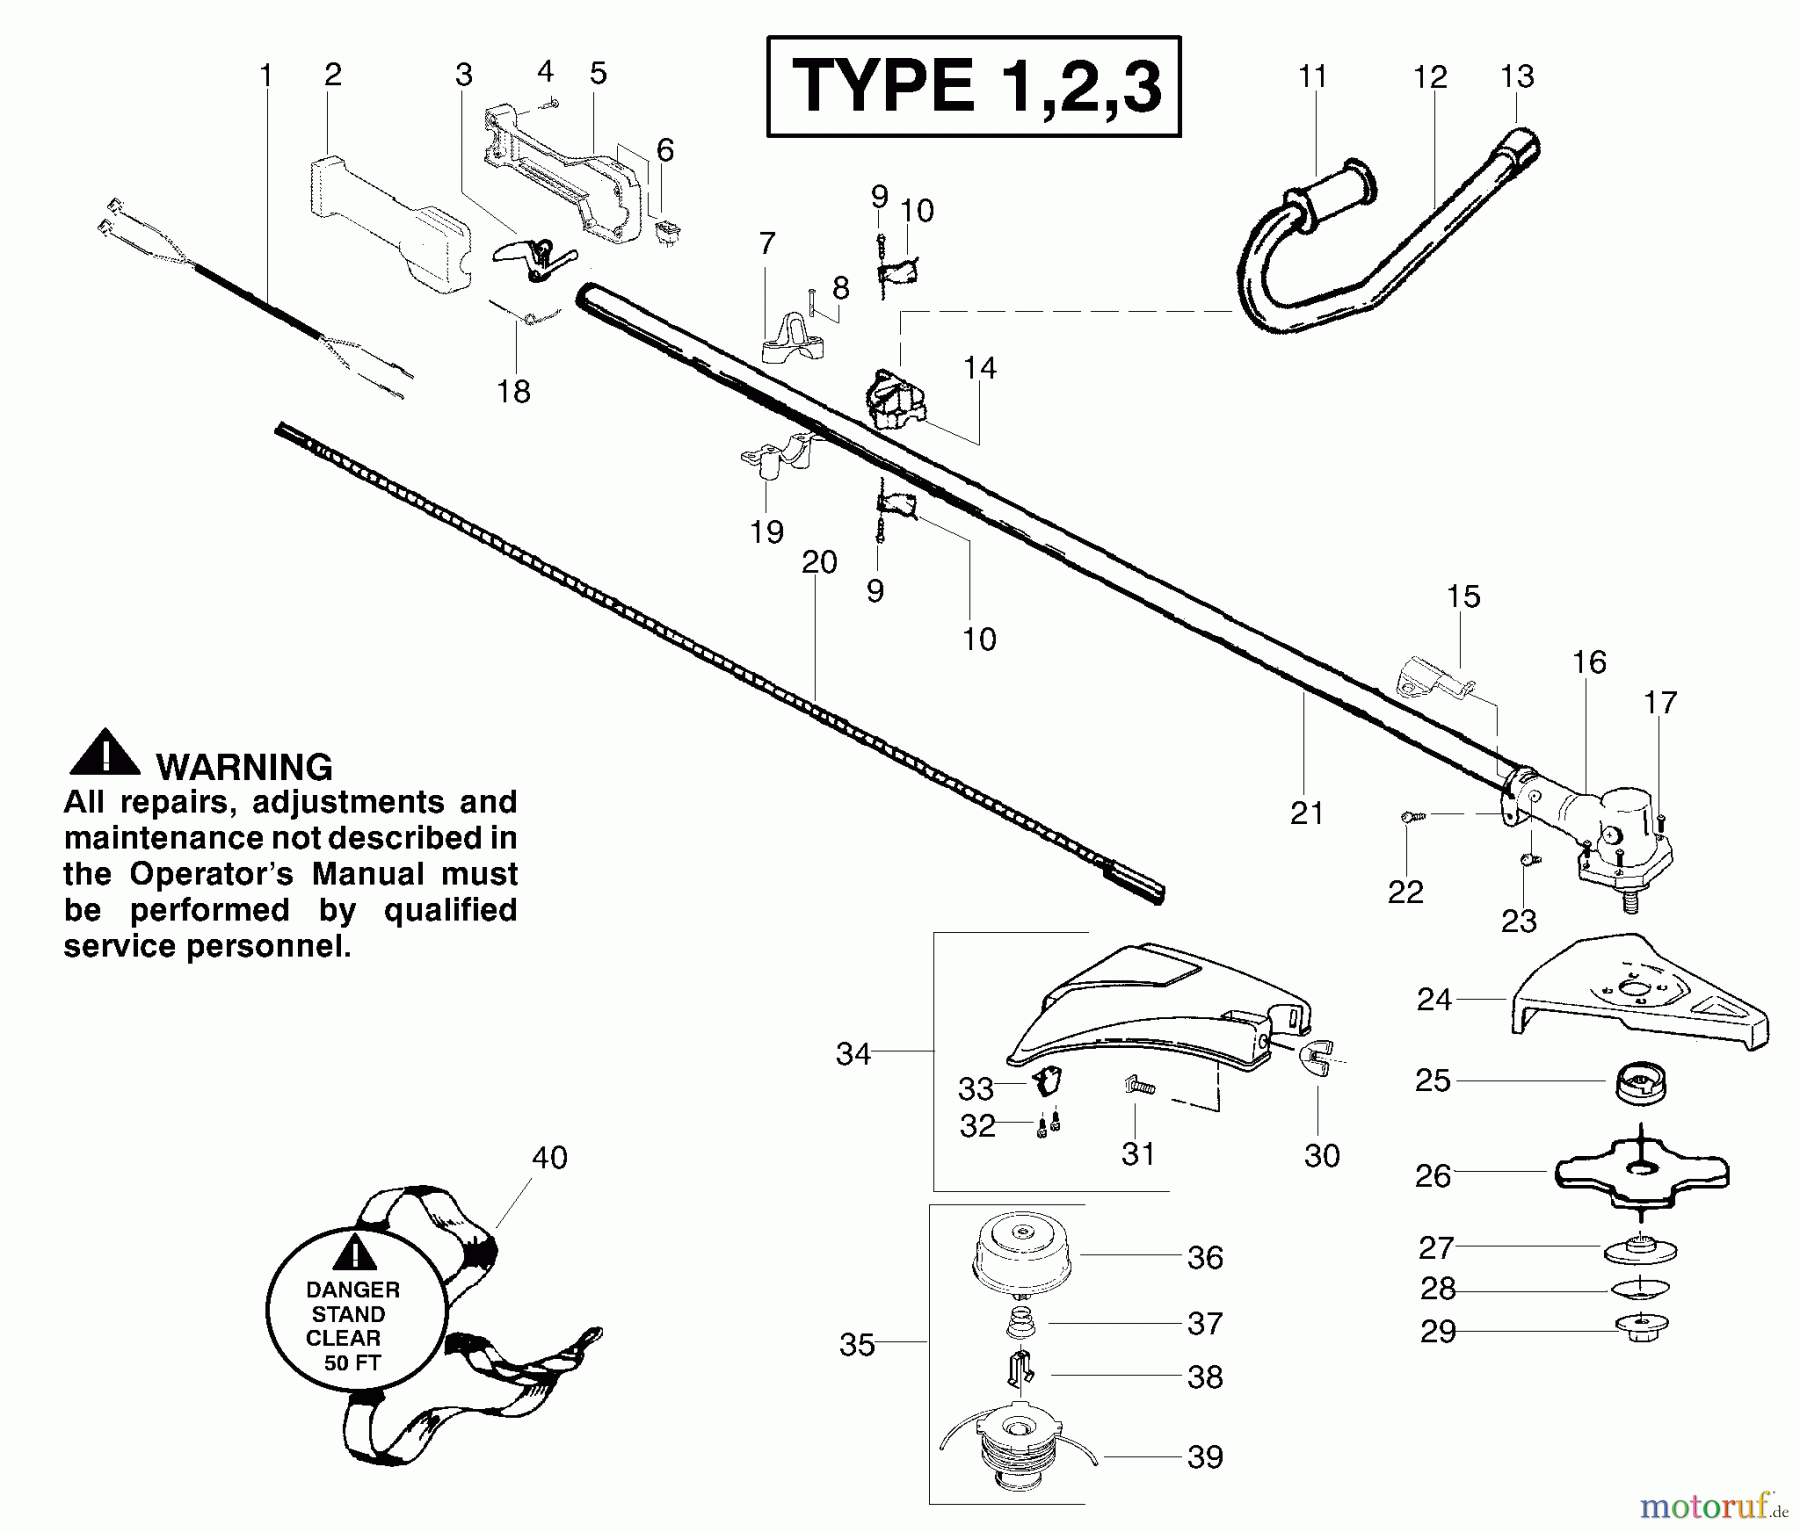  Poulan / Weed Eater Motorsensen, Trimmer BC2500LE (Type 3) - Weed Eater String Trimmer Handle & Driveshaft Assembly Type 1-3